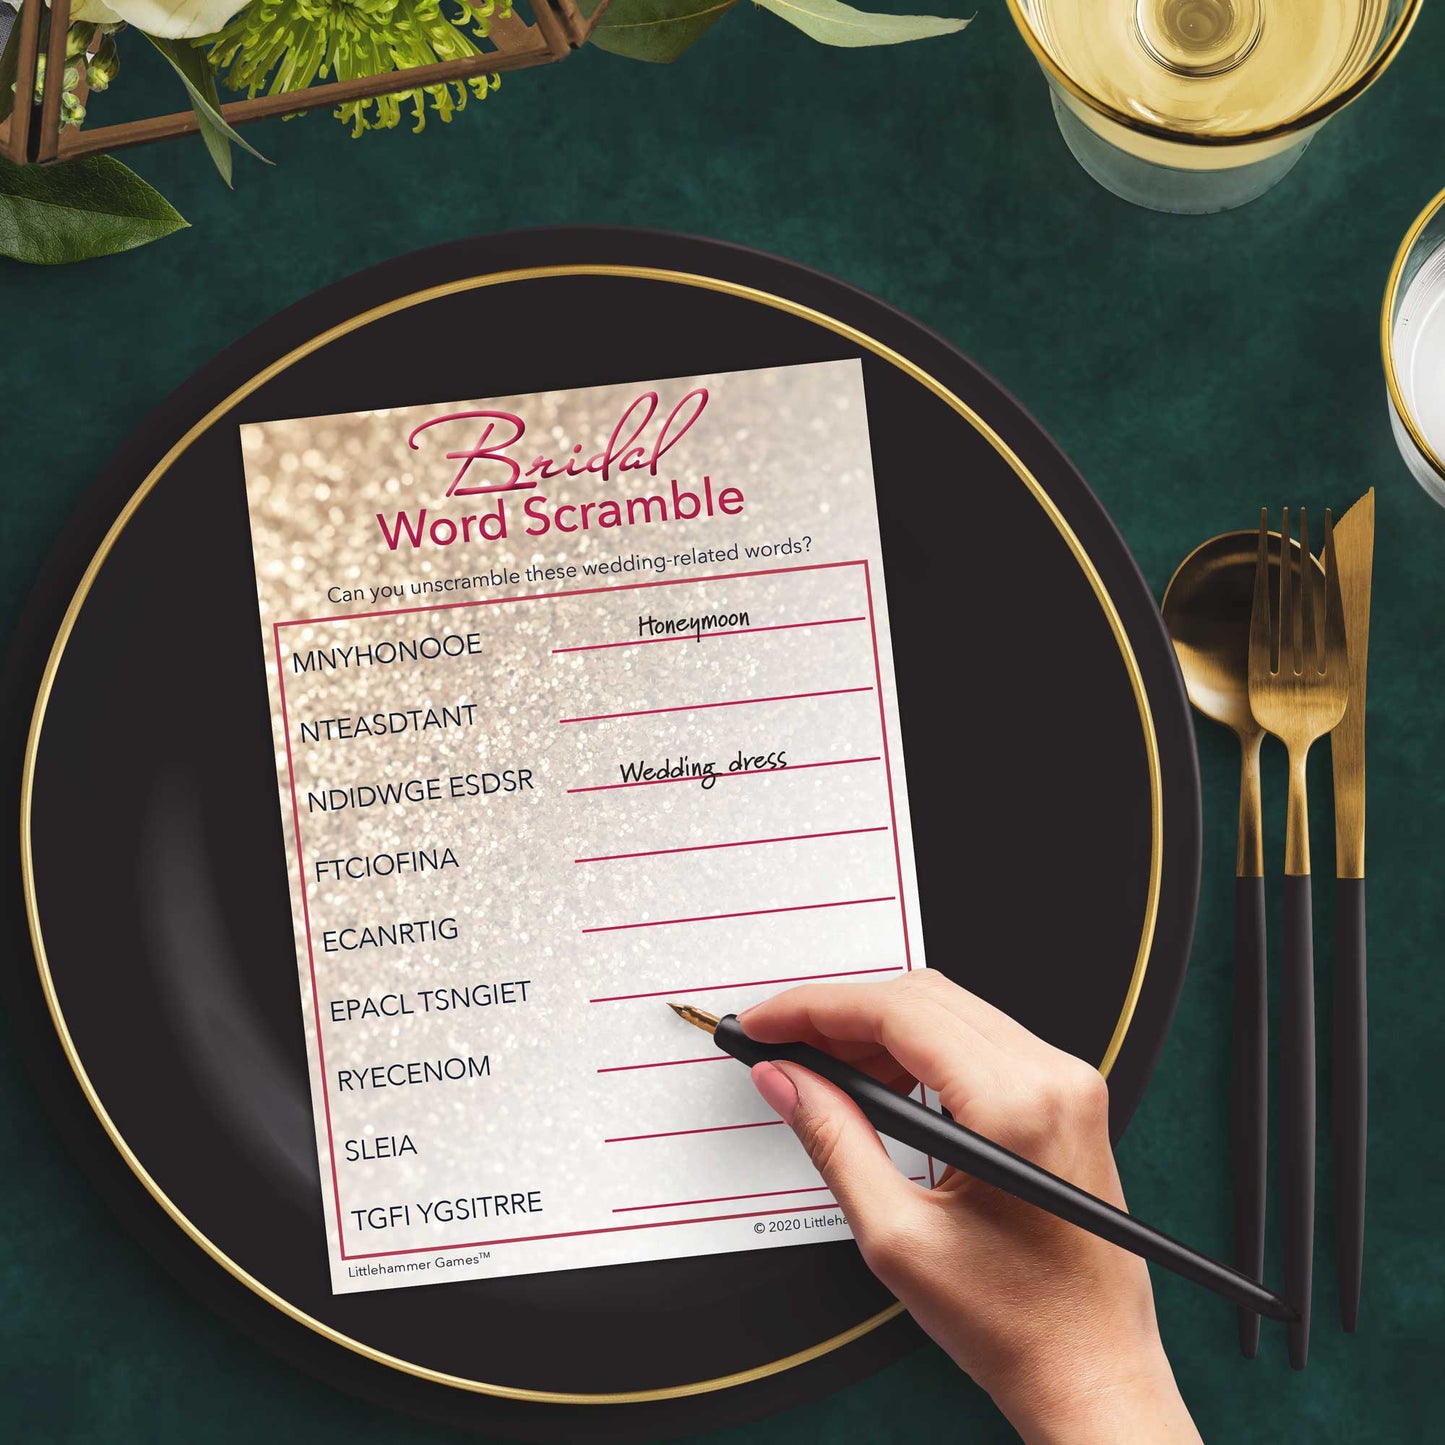 Woman with a pen playing a glittery rose gold Bridal Word Scramble game card at a dark place setting